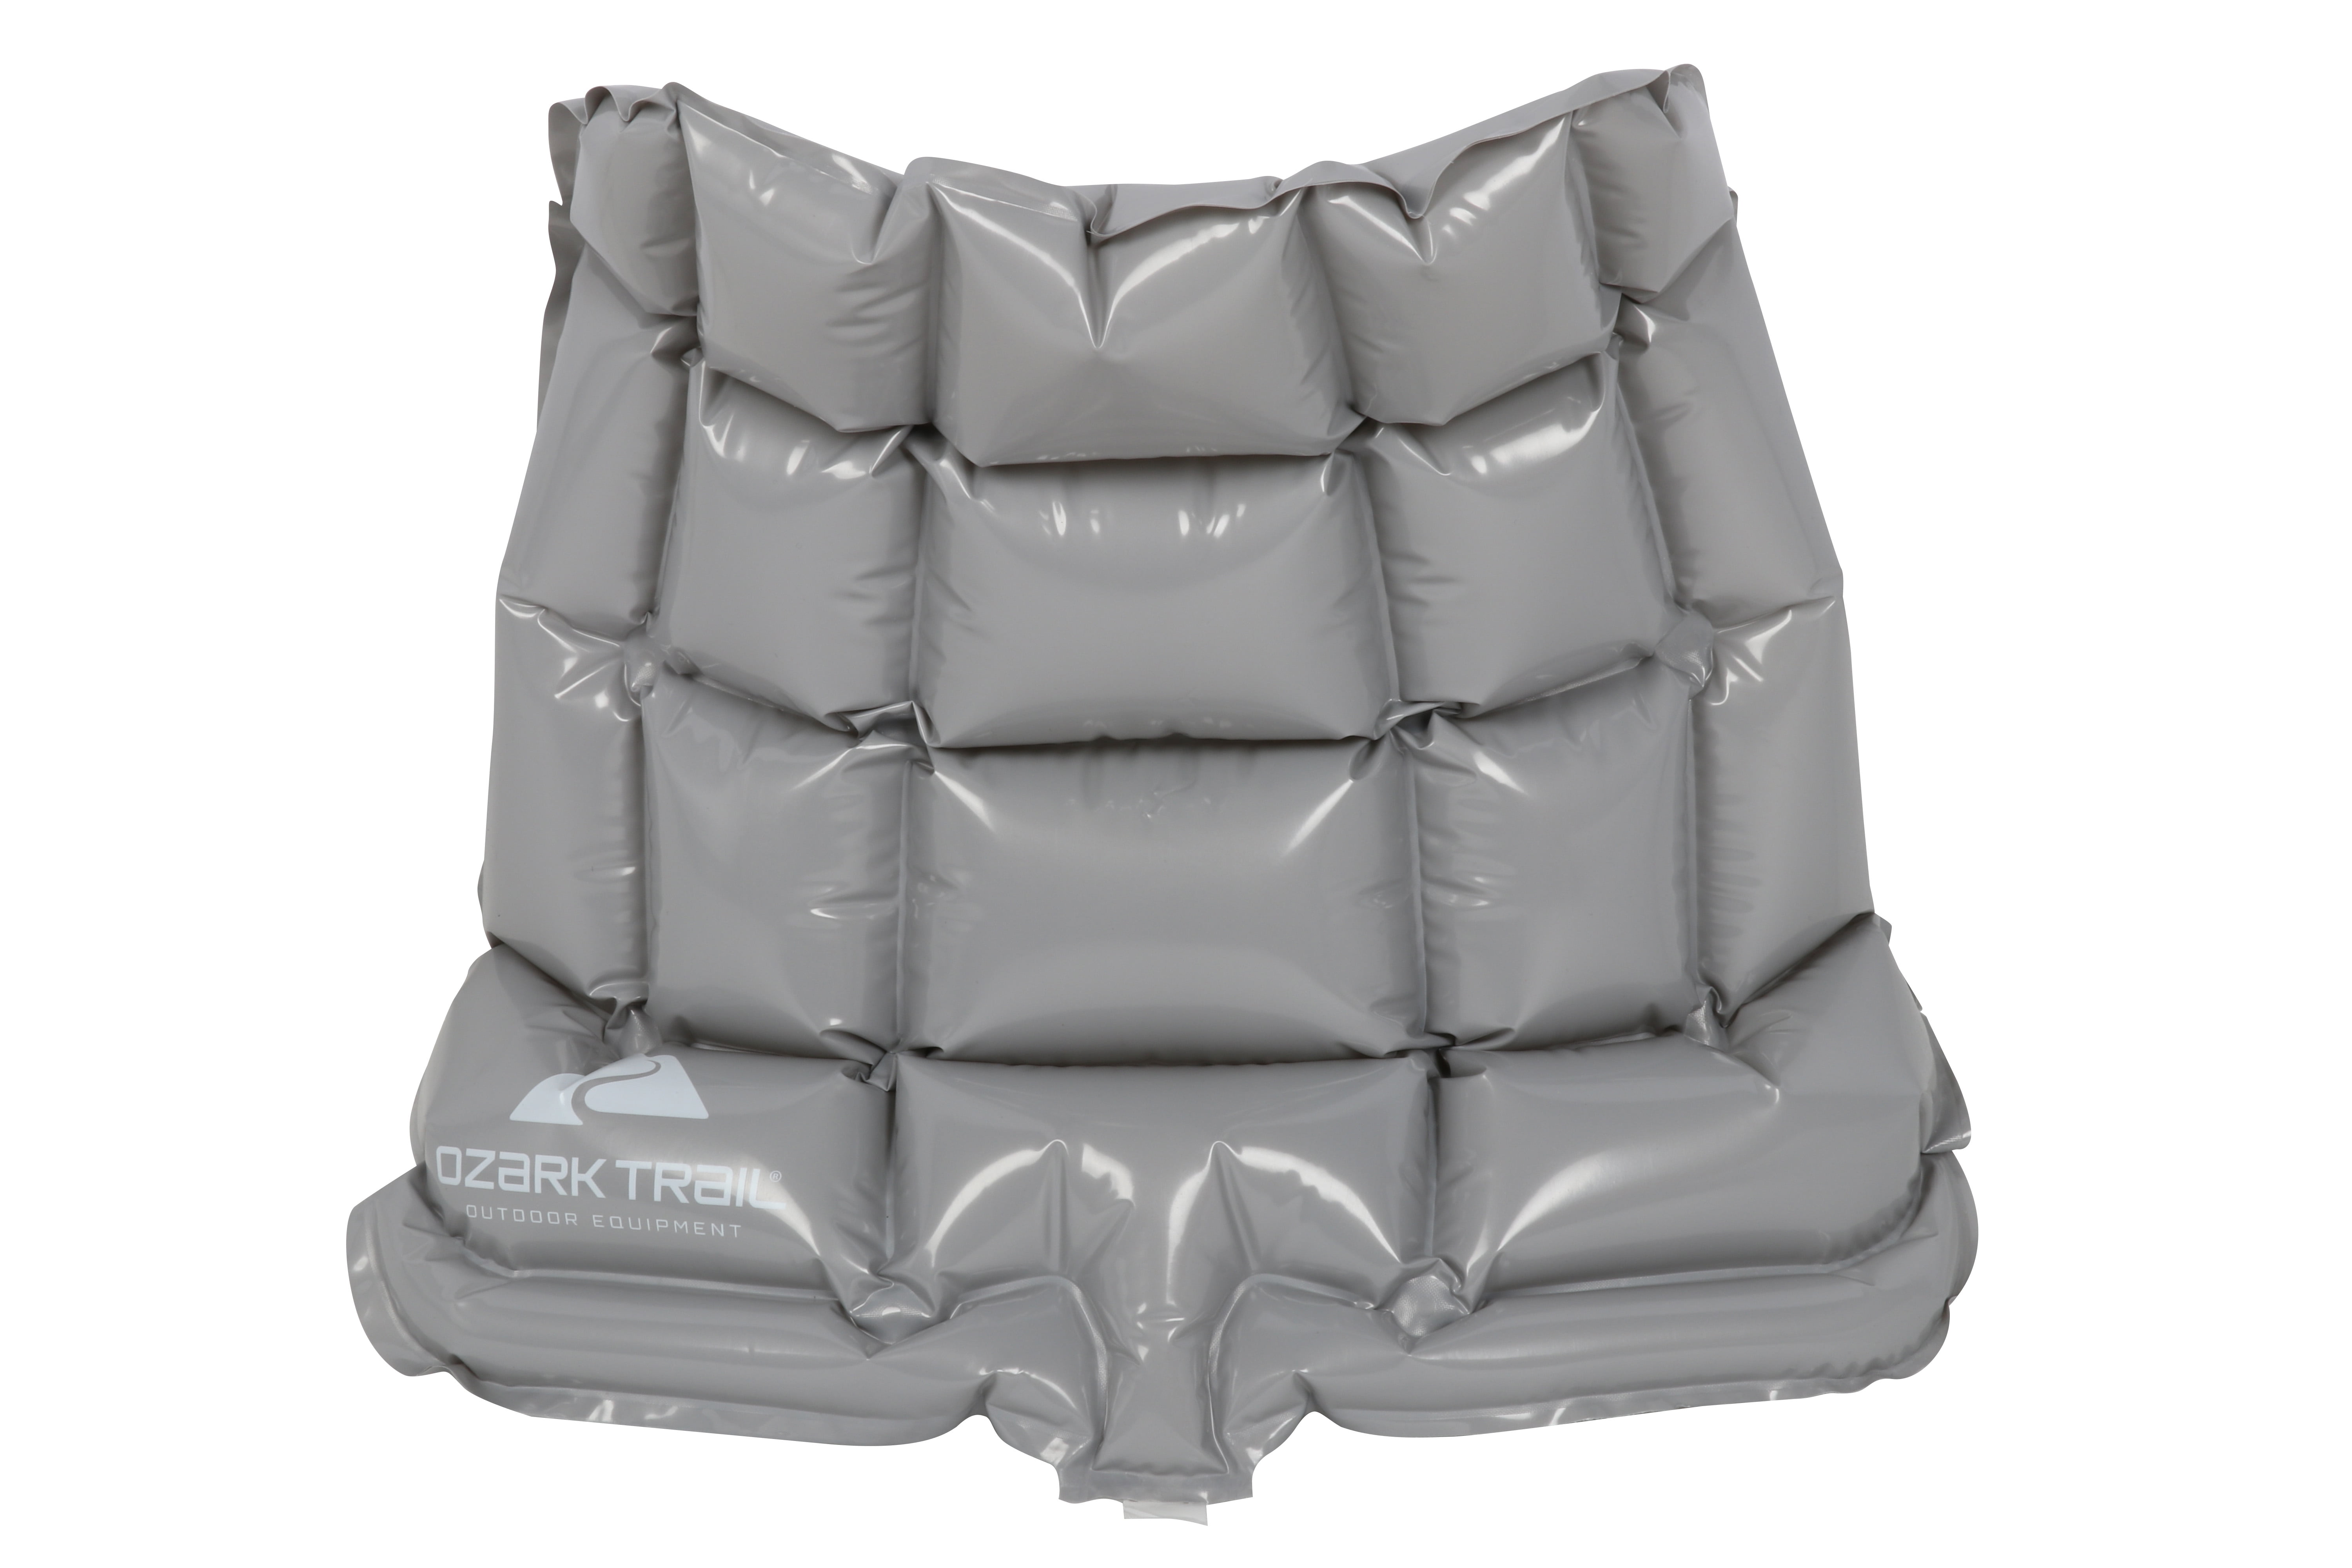 seat cushion inflatable